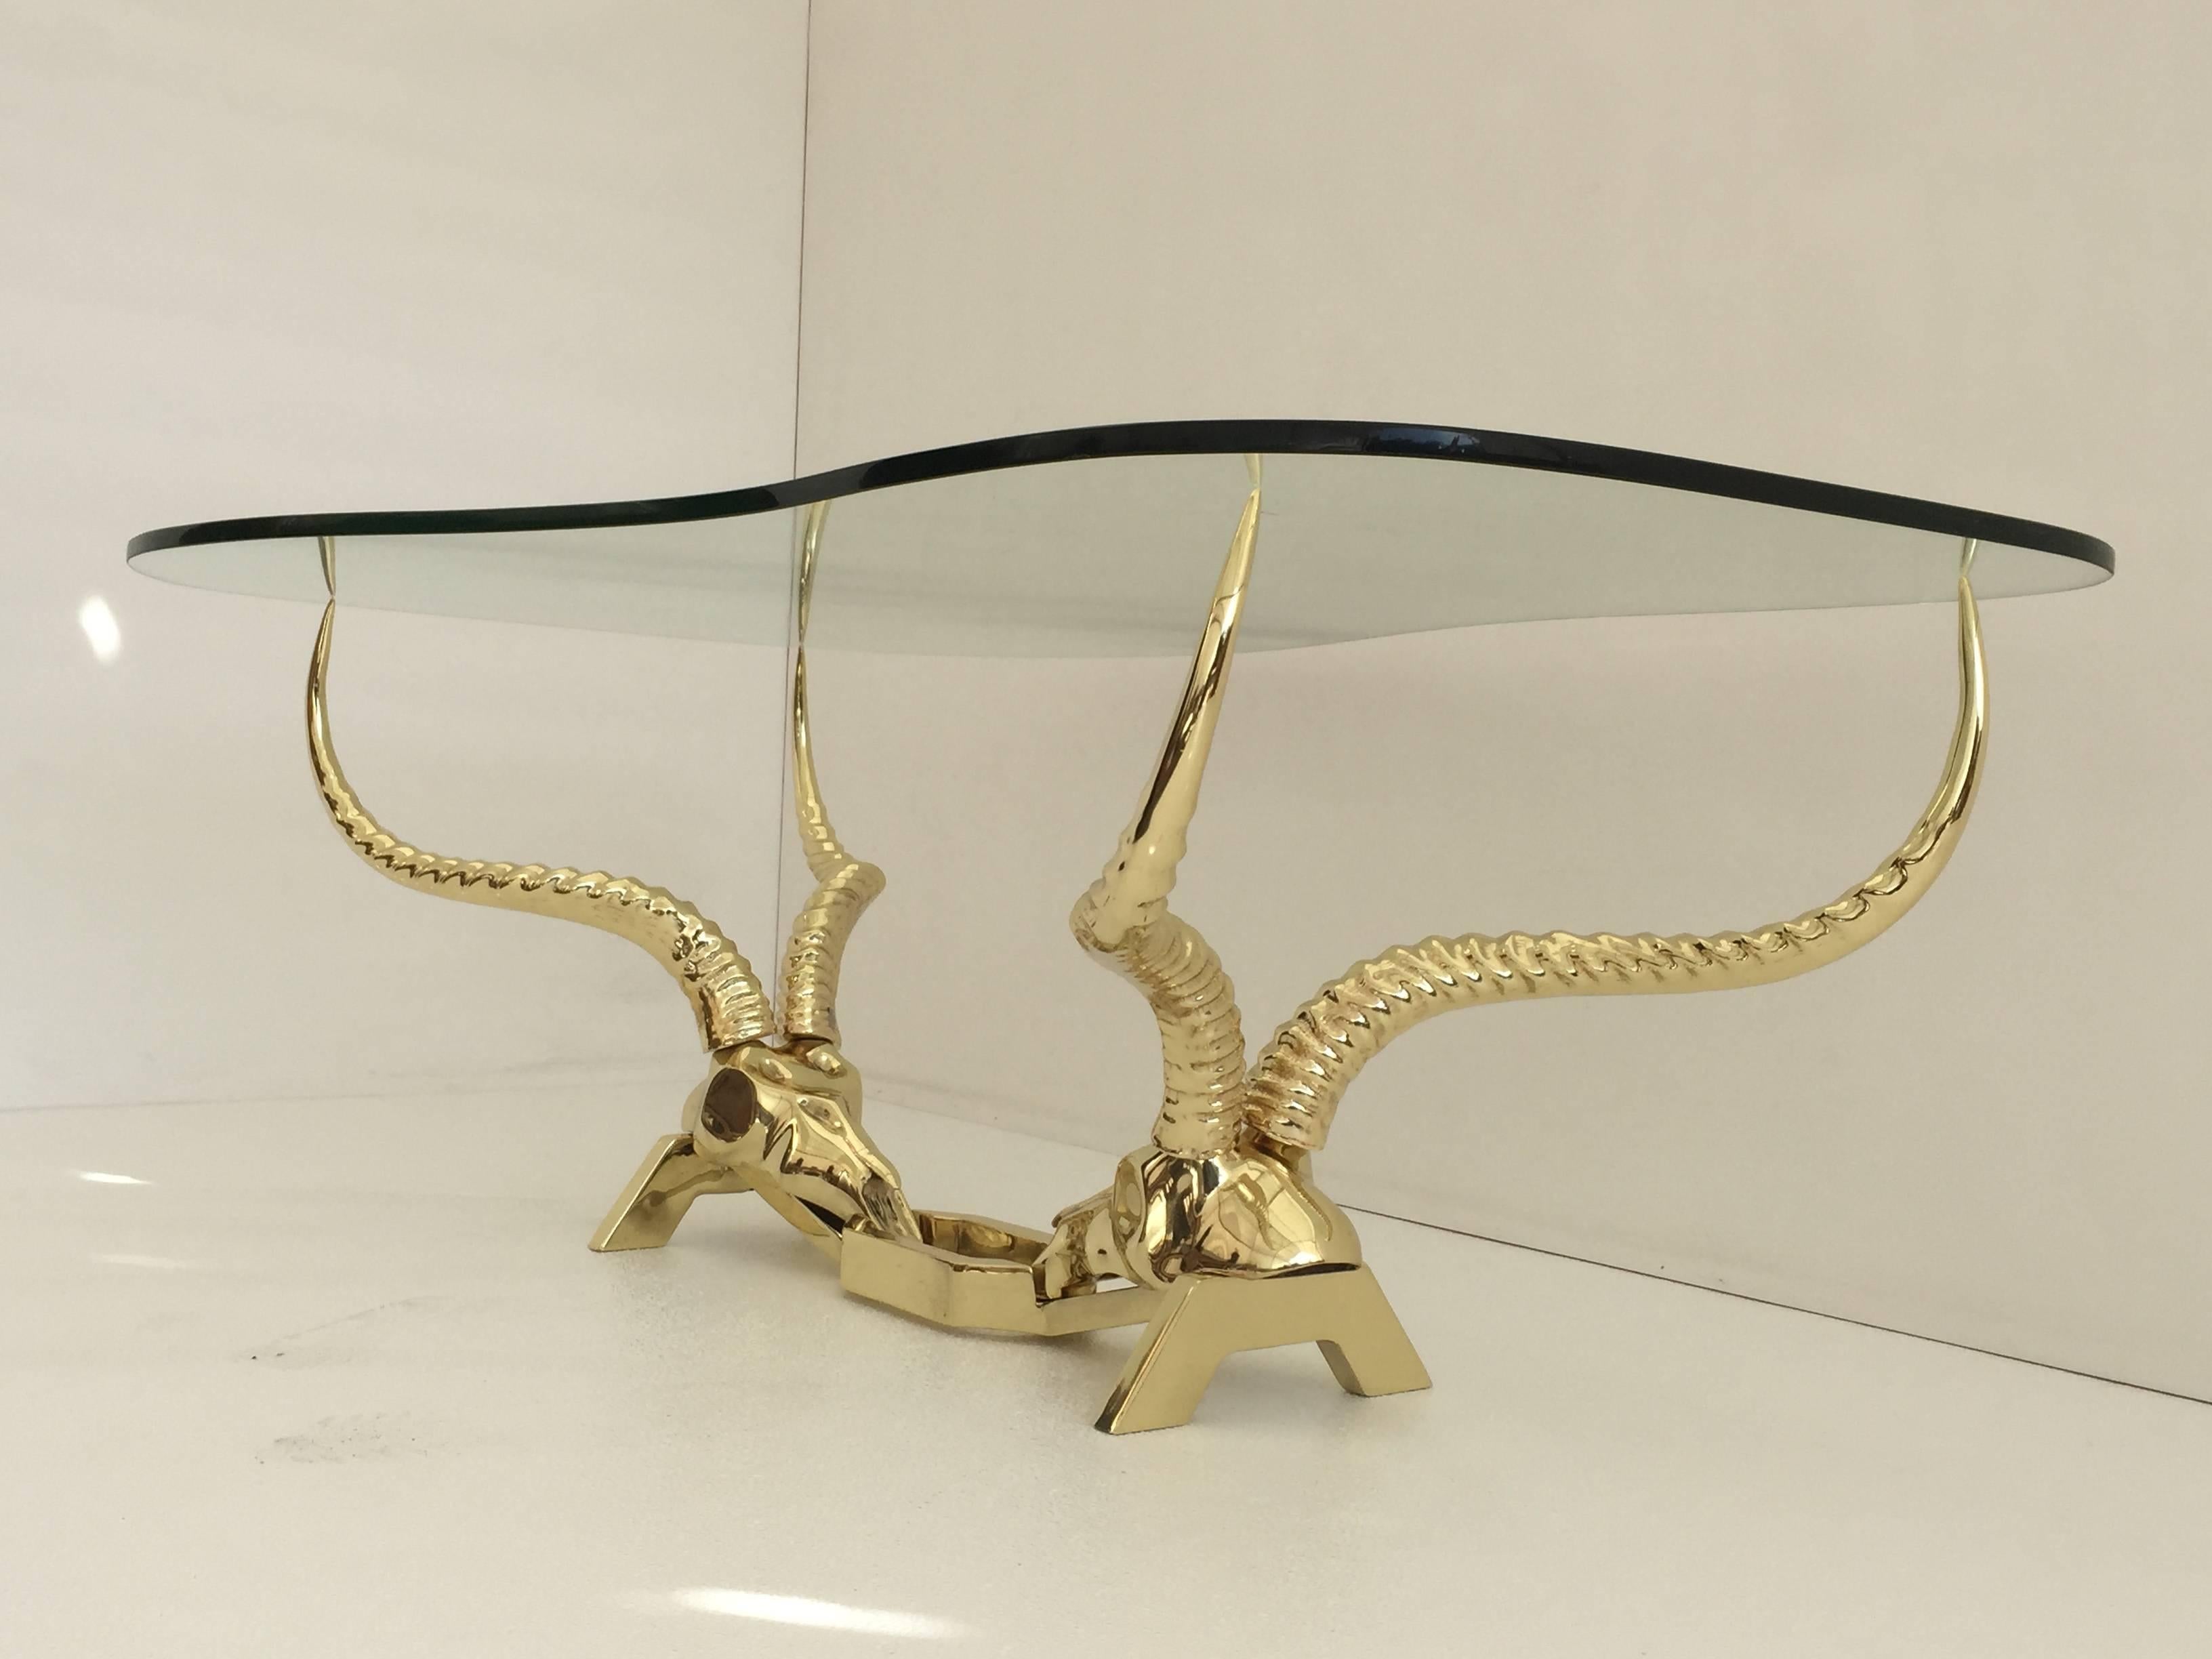 Hollywood Regency Brass Ibex or Antelope Coffee Table by Fondica, France